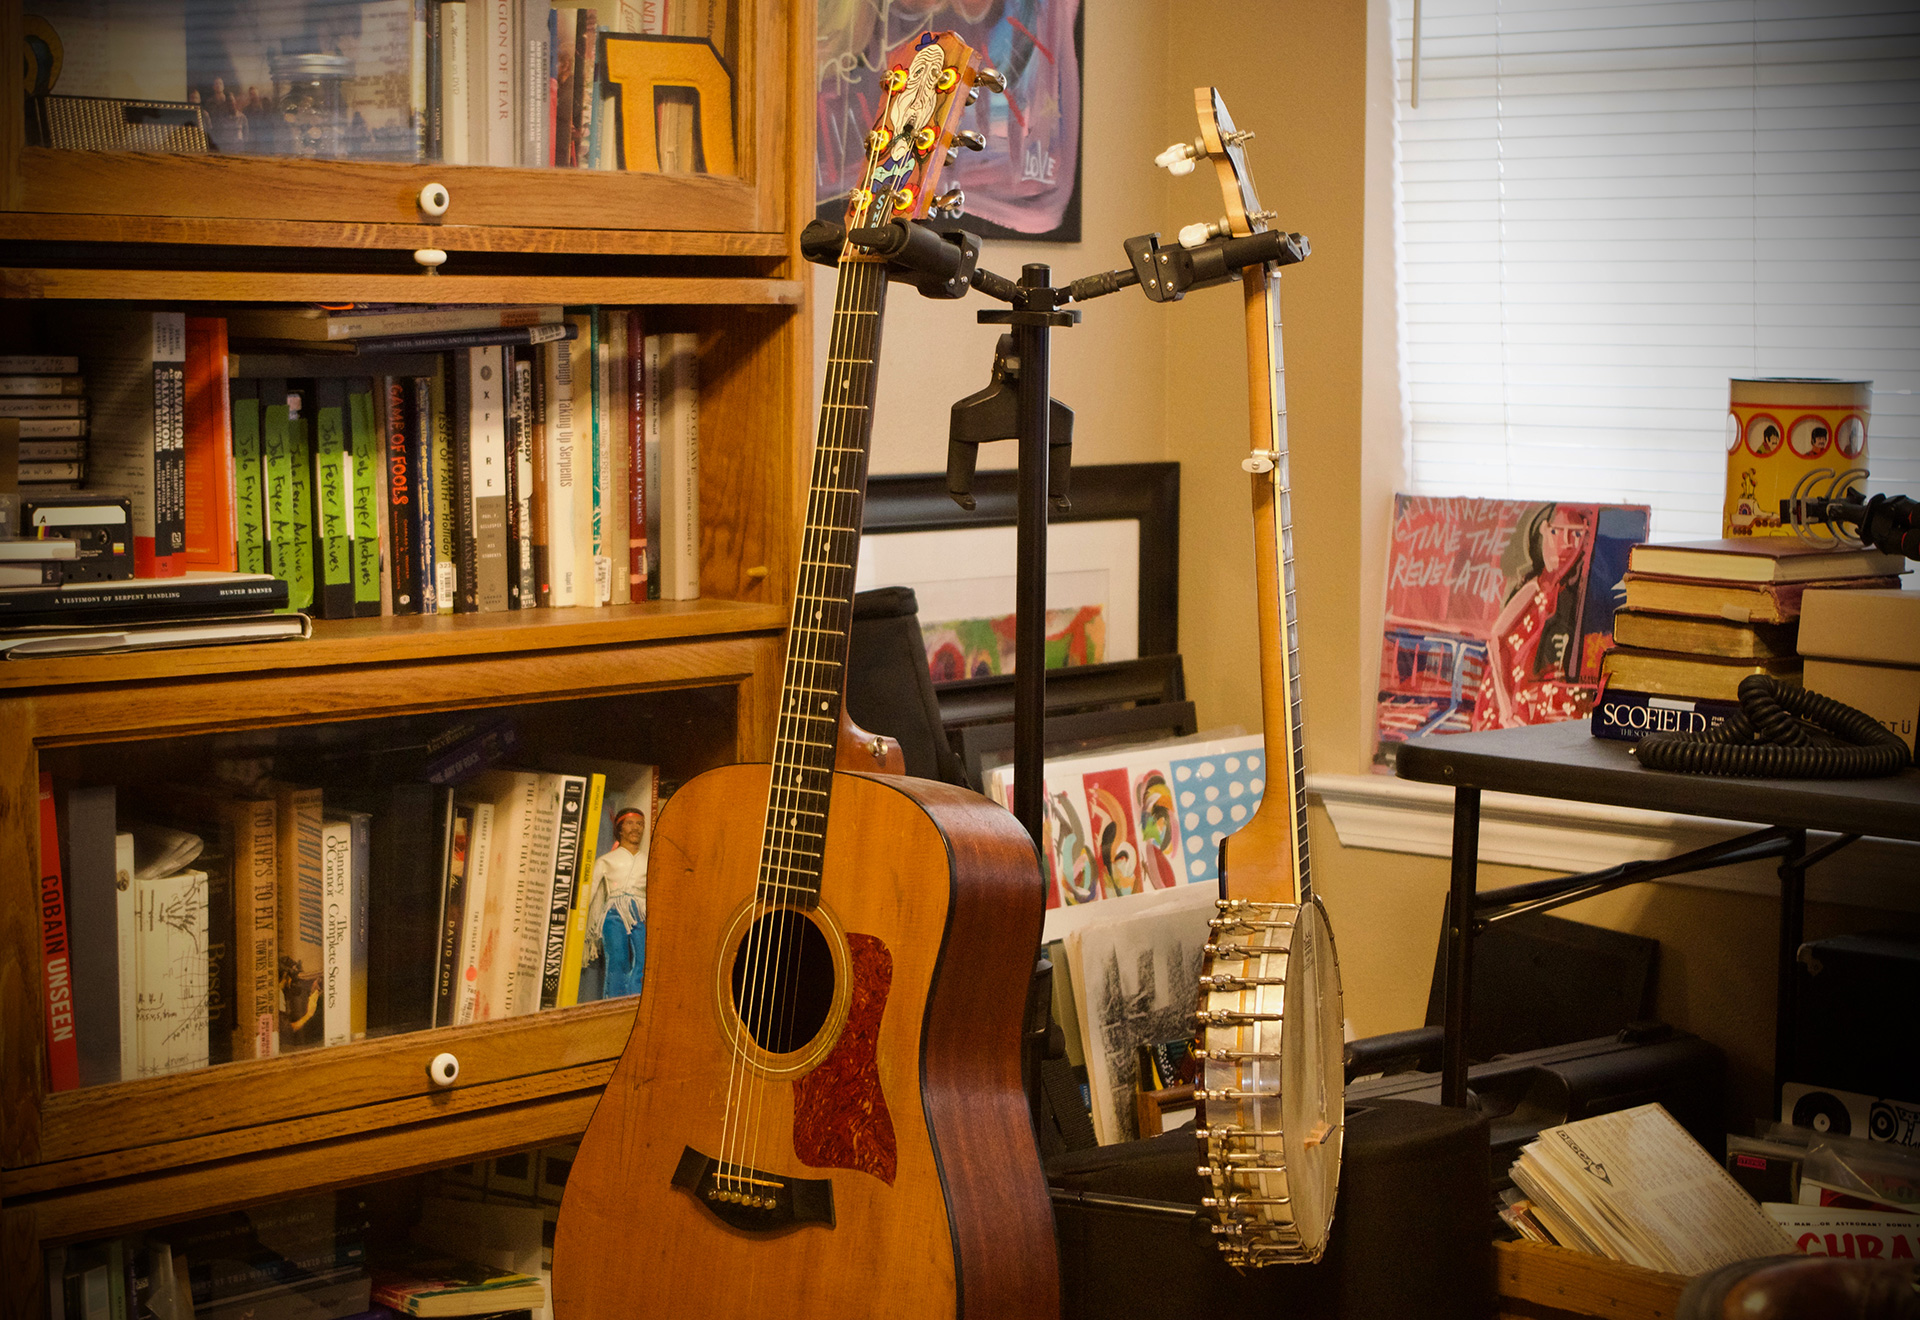 Abe's guitar and banjo (photograph by Eli Bartlett)